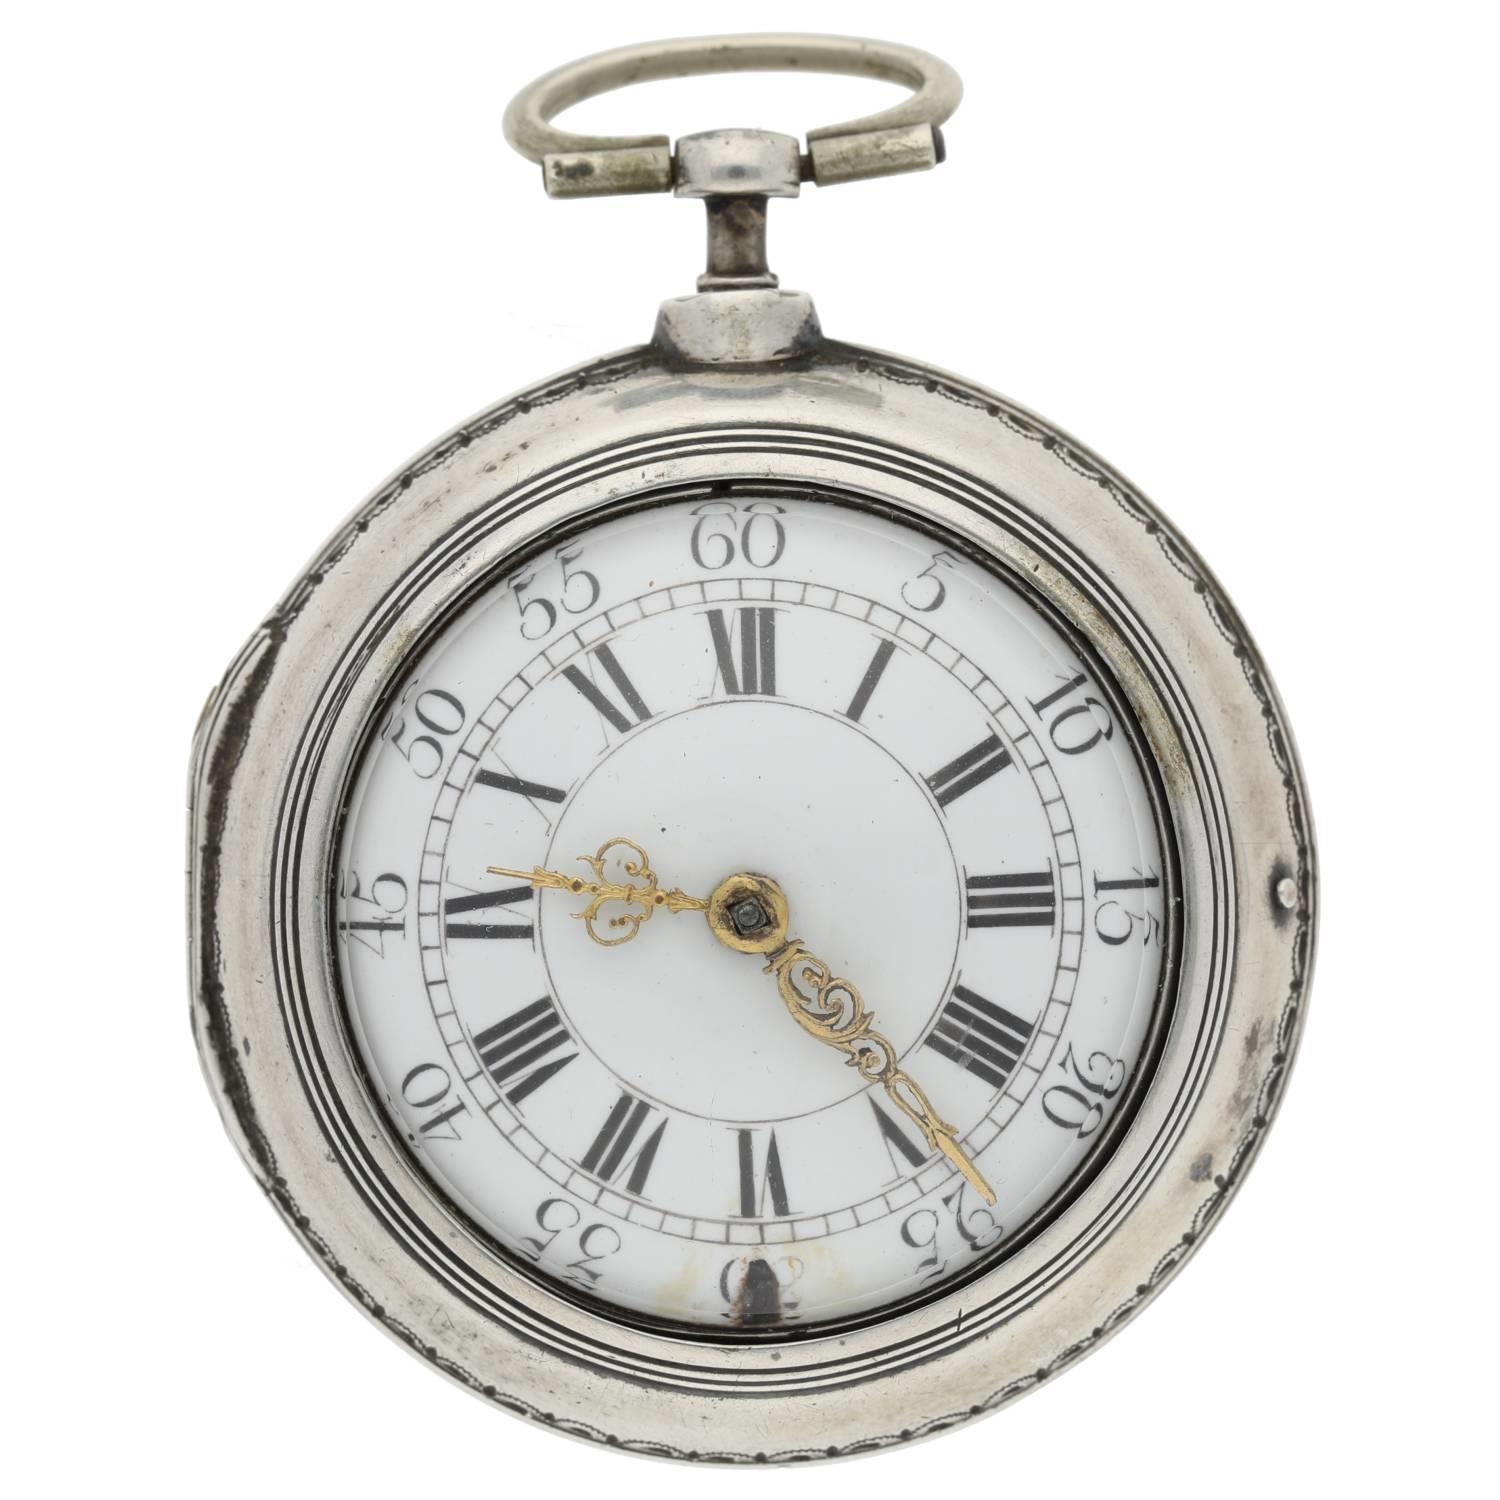 Tomson, London - English 18th century silver pair cased verge pocket watch, signed fusee movement, - Image 2 of 7